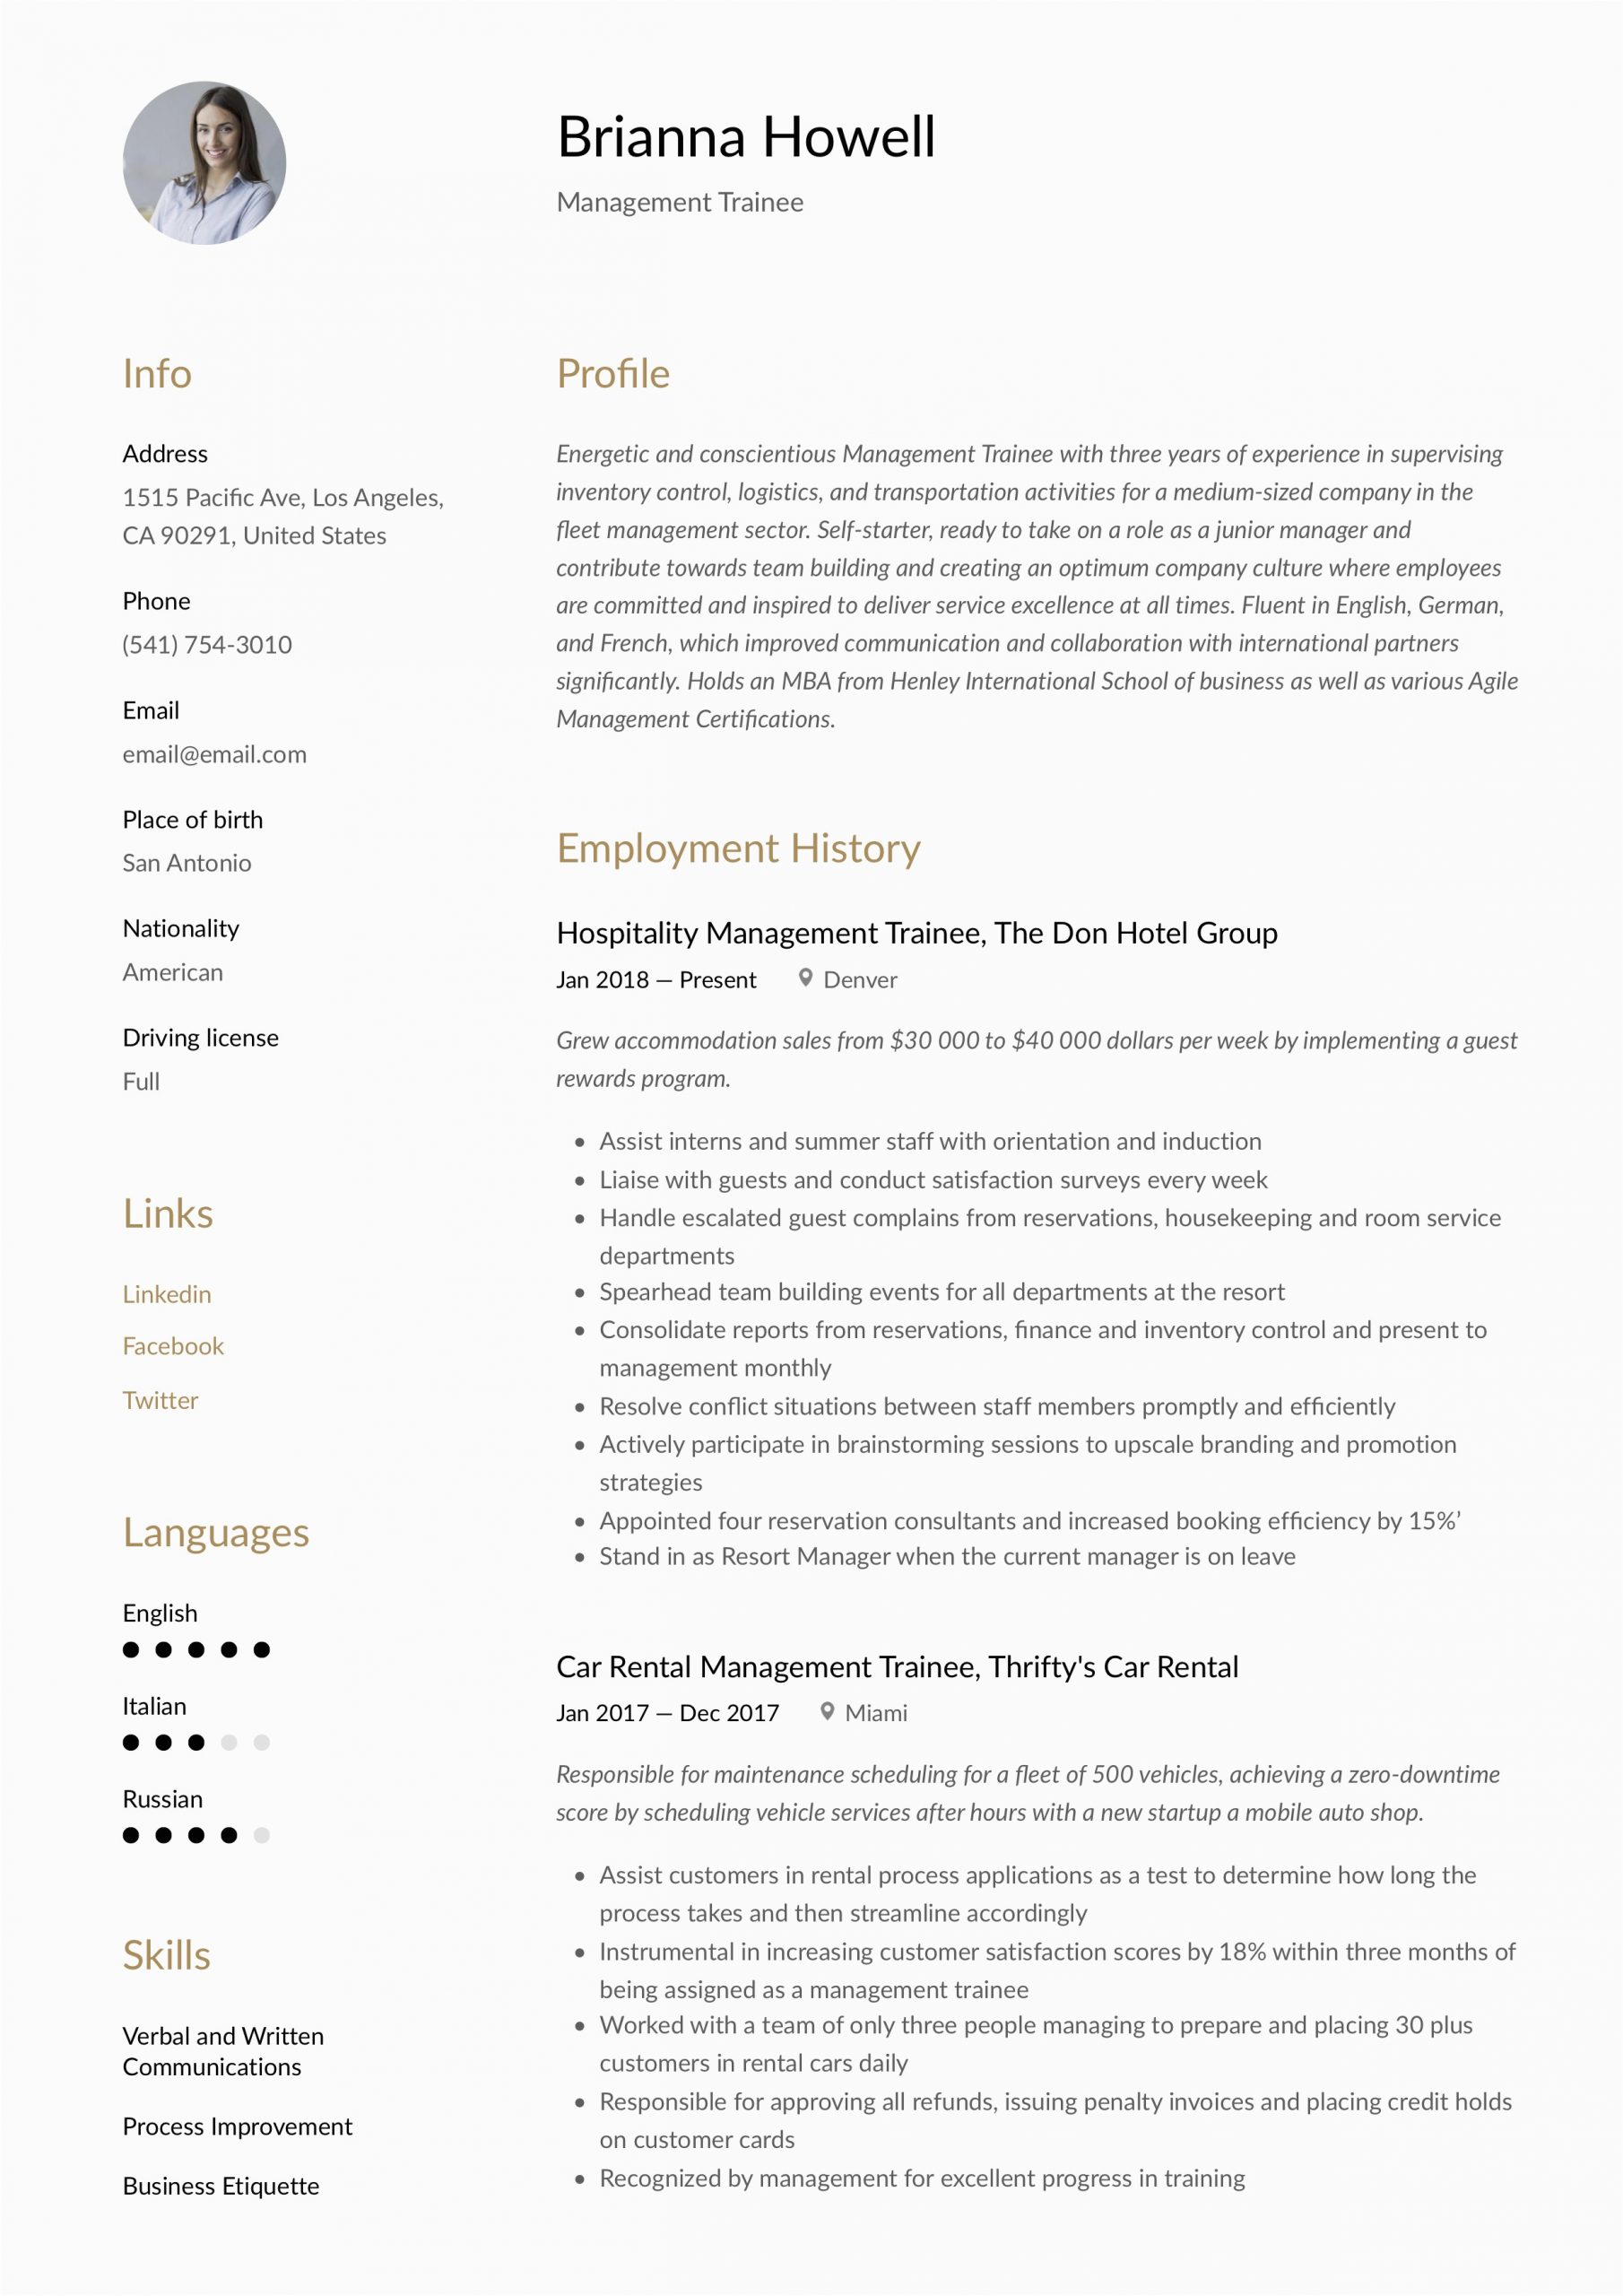 Resume Sample for Management Trainee Position Management Resume & Writing Guide 12 Examples